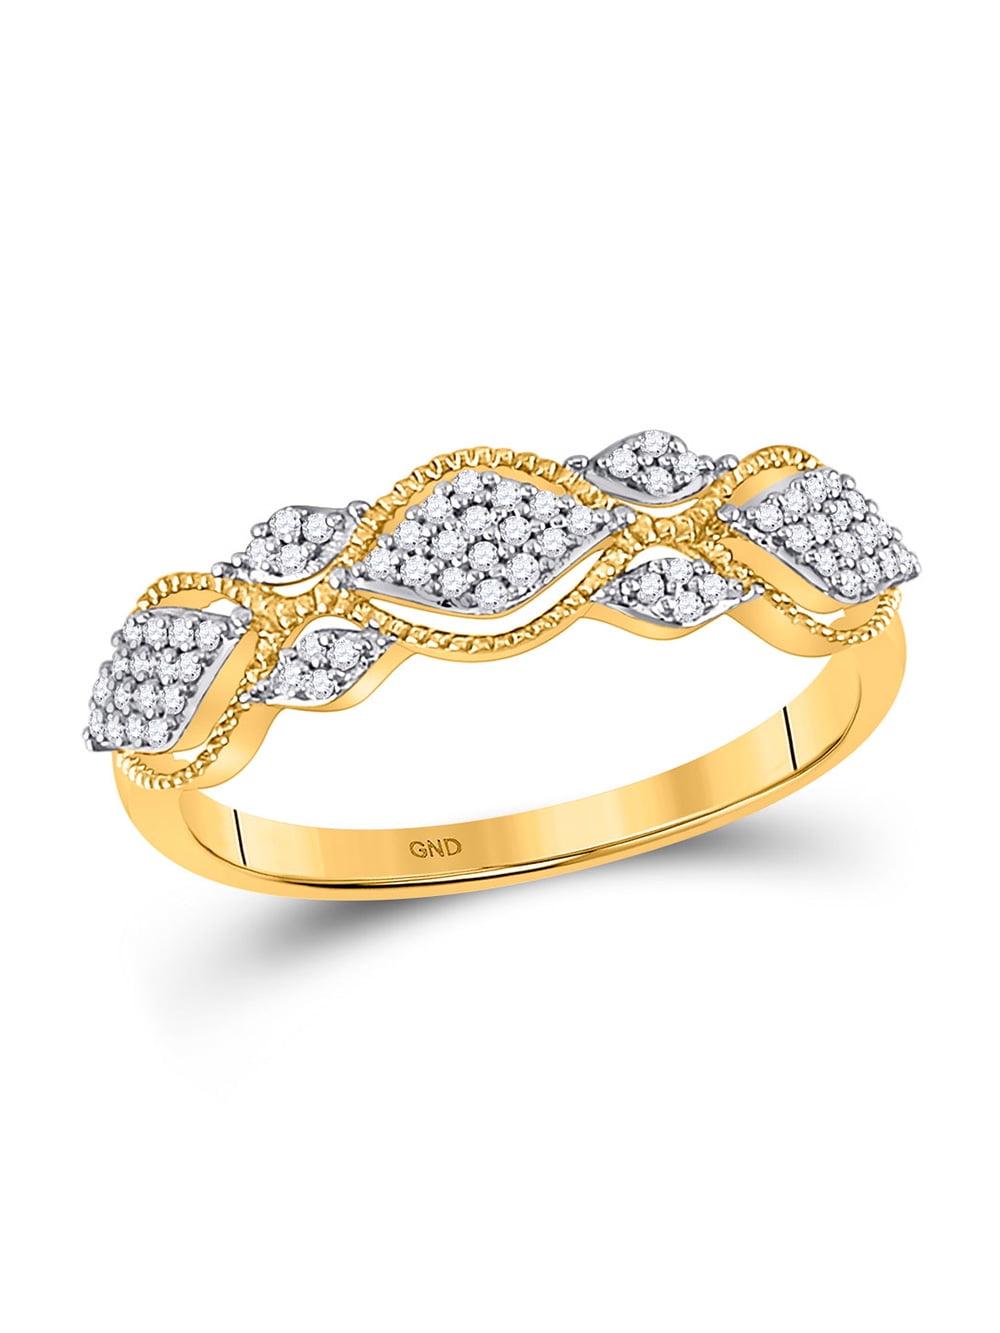 Details about   Women’s 1/6 CT T.W Size 6 10k Yellow Gold. Channel Set Diamond Wedding Ring 